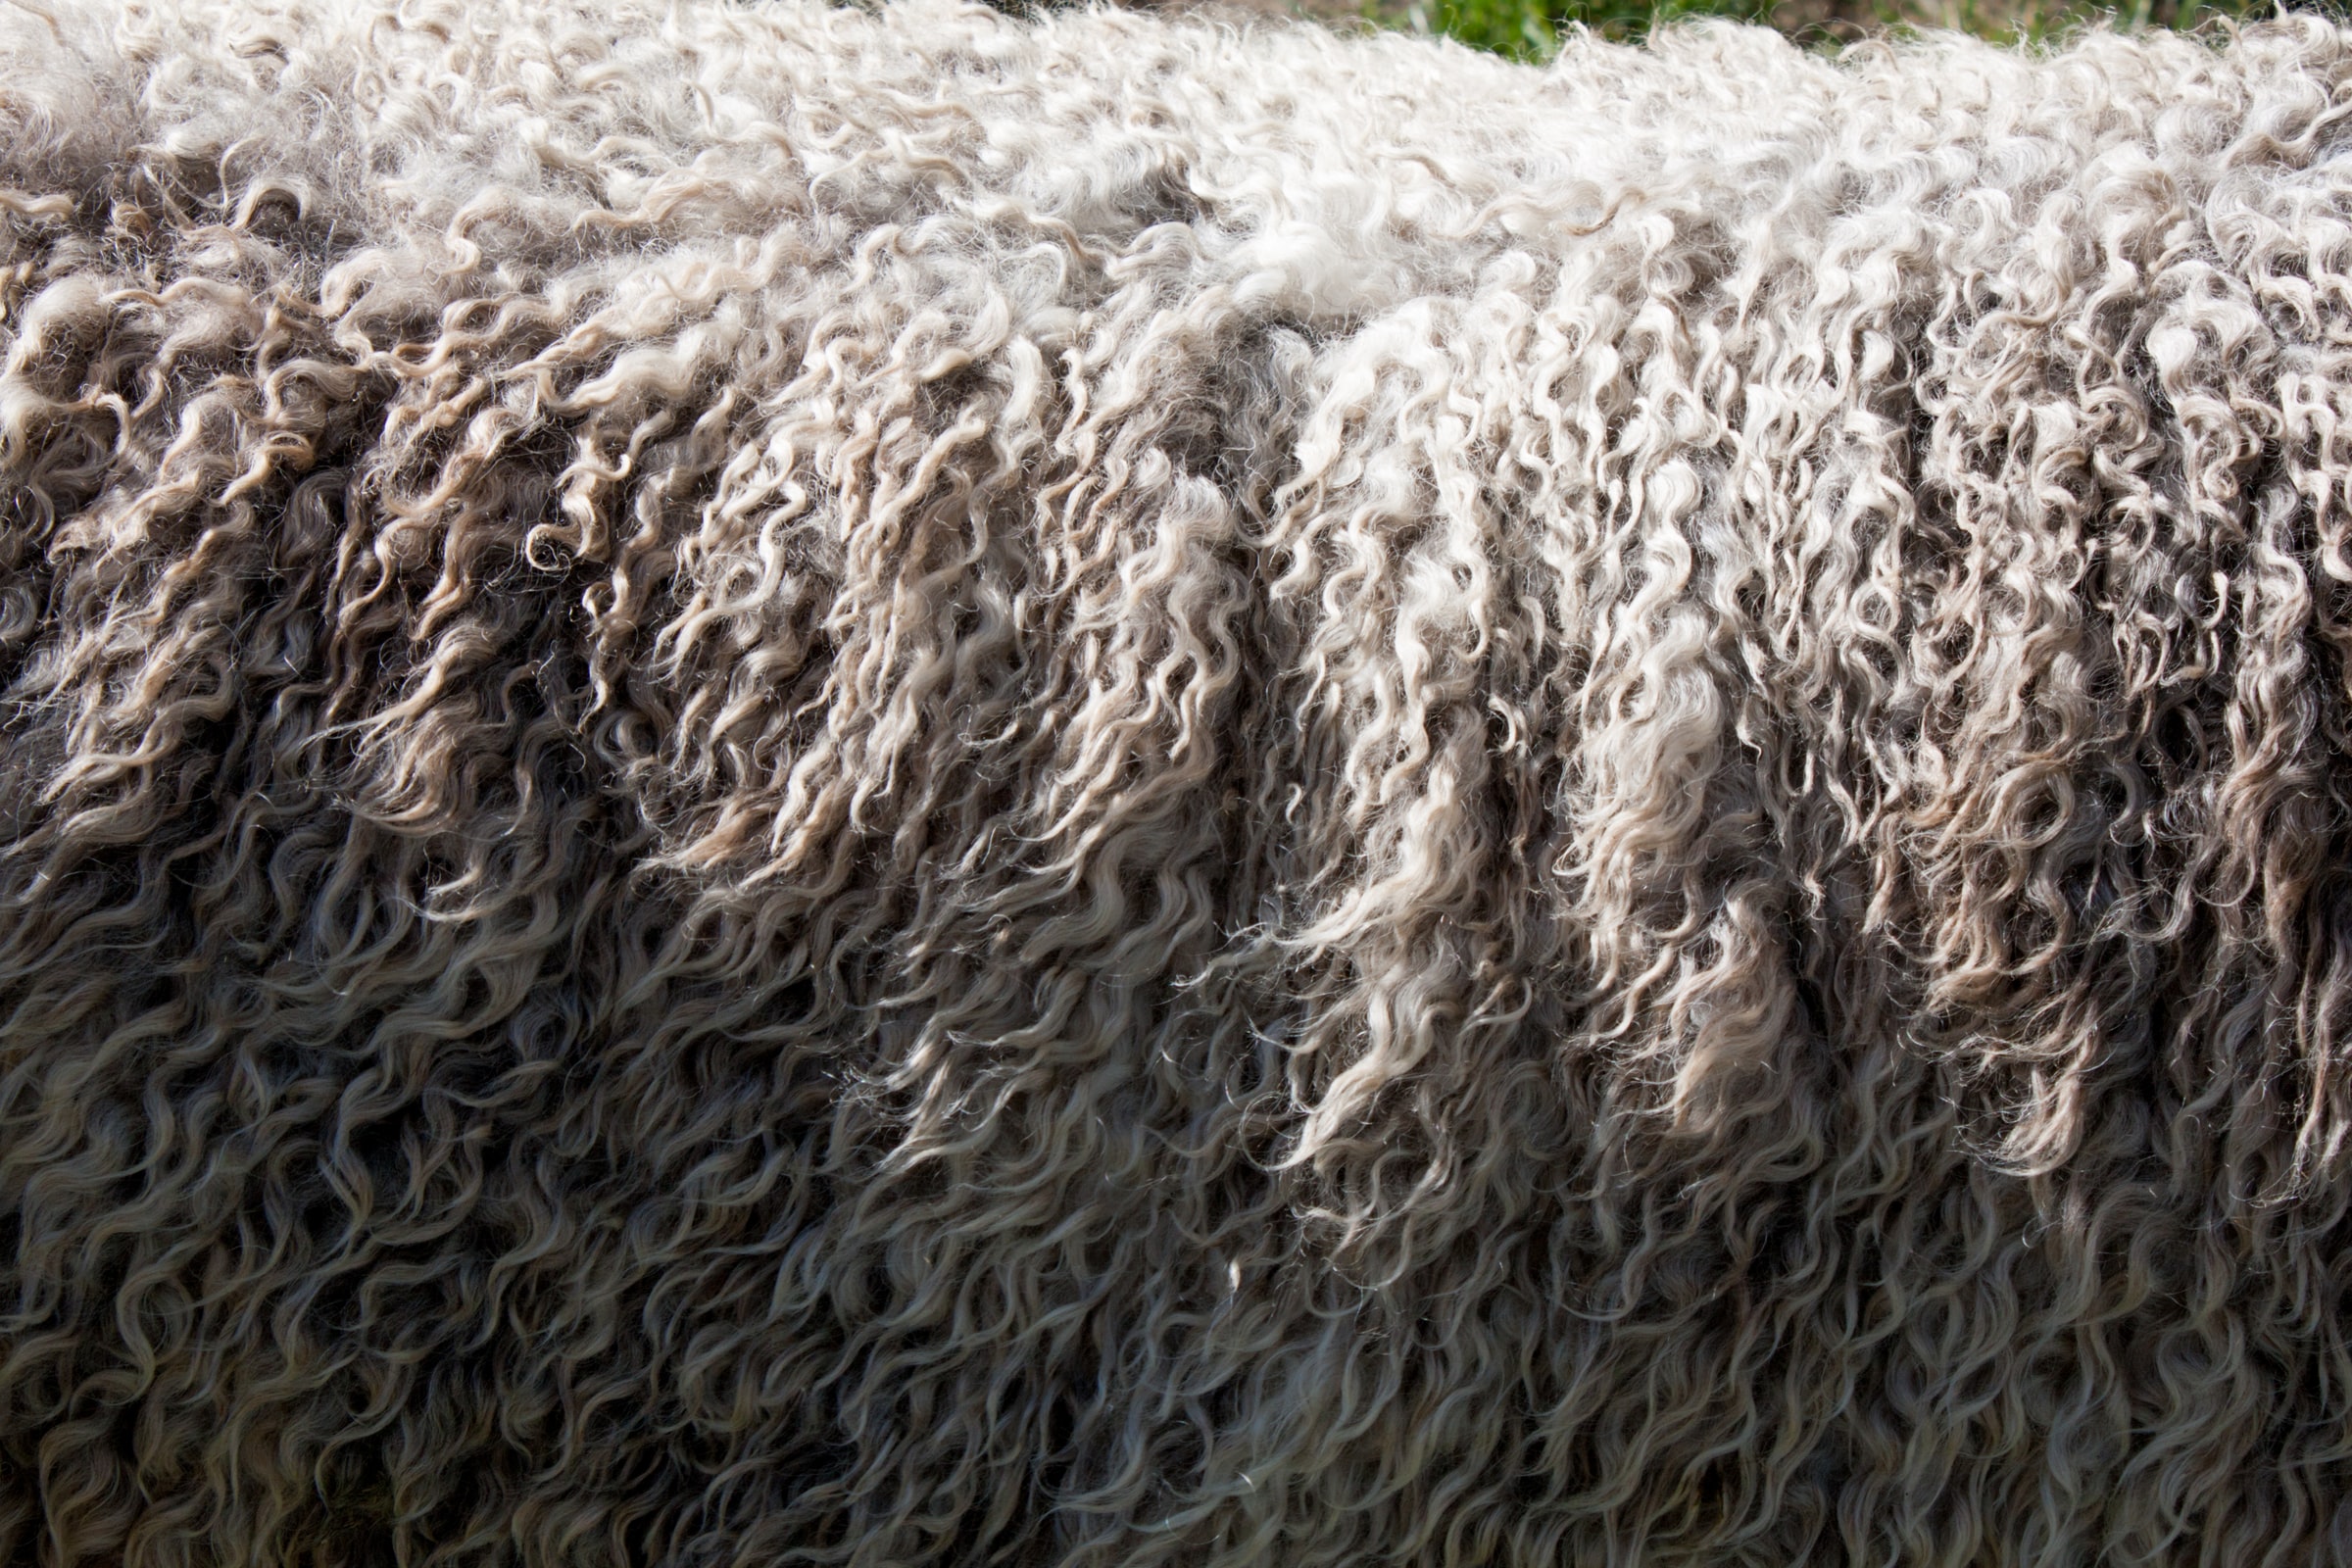 Sheep's wool in close up